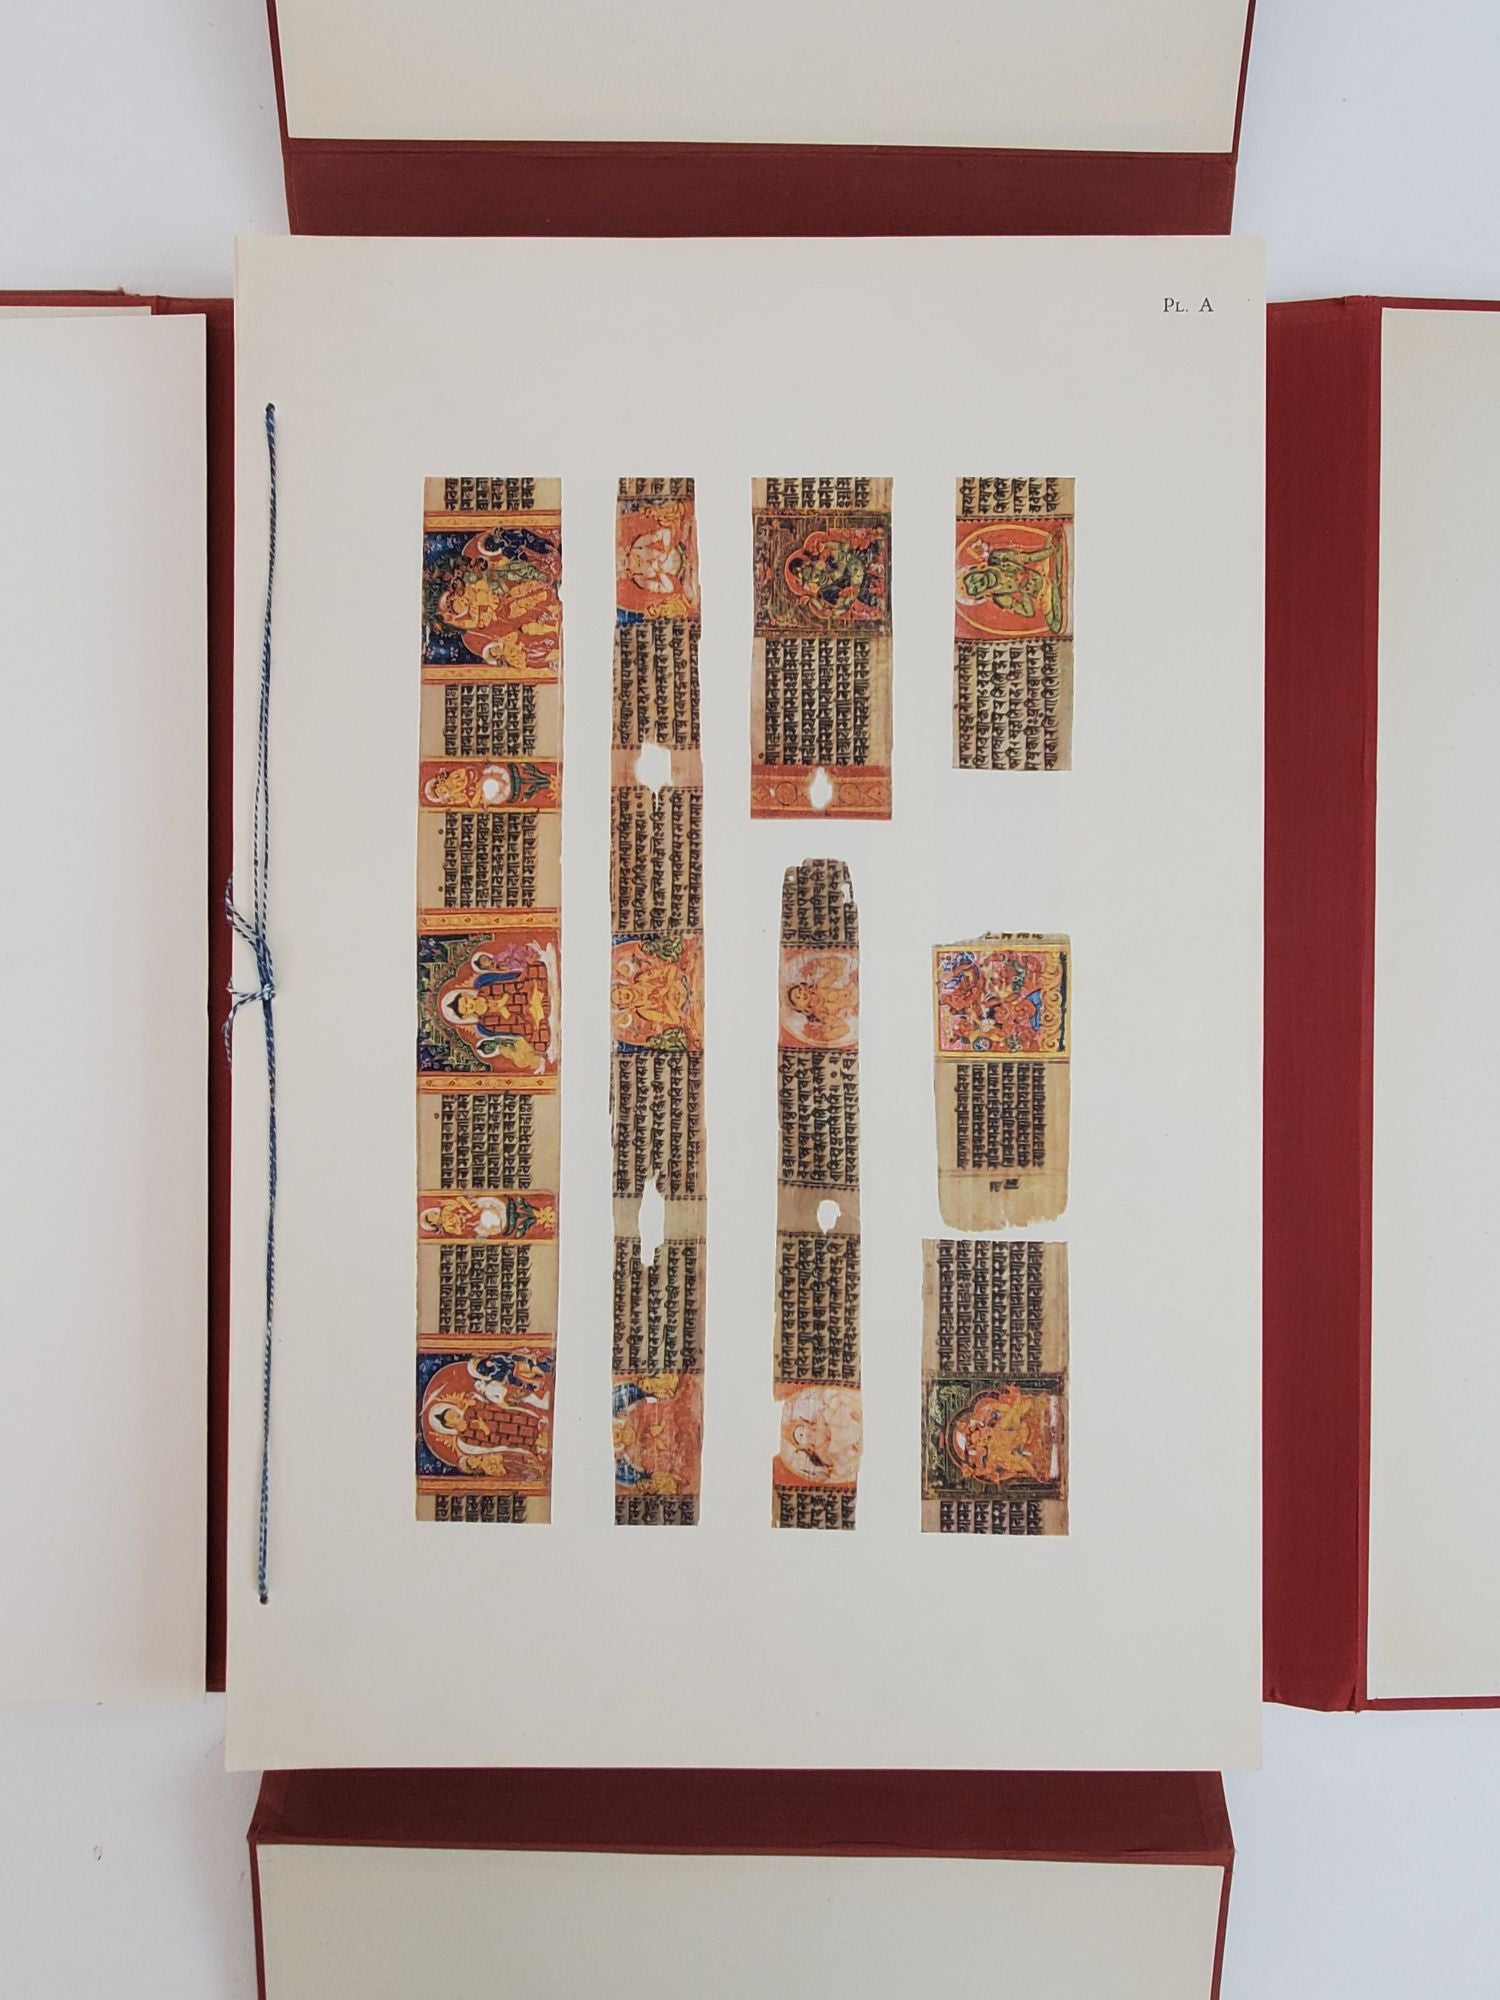 Product Image for TIBETAN PAINTED SCROLLS [Three Volumes]